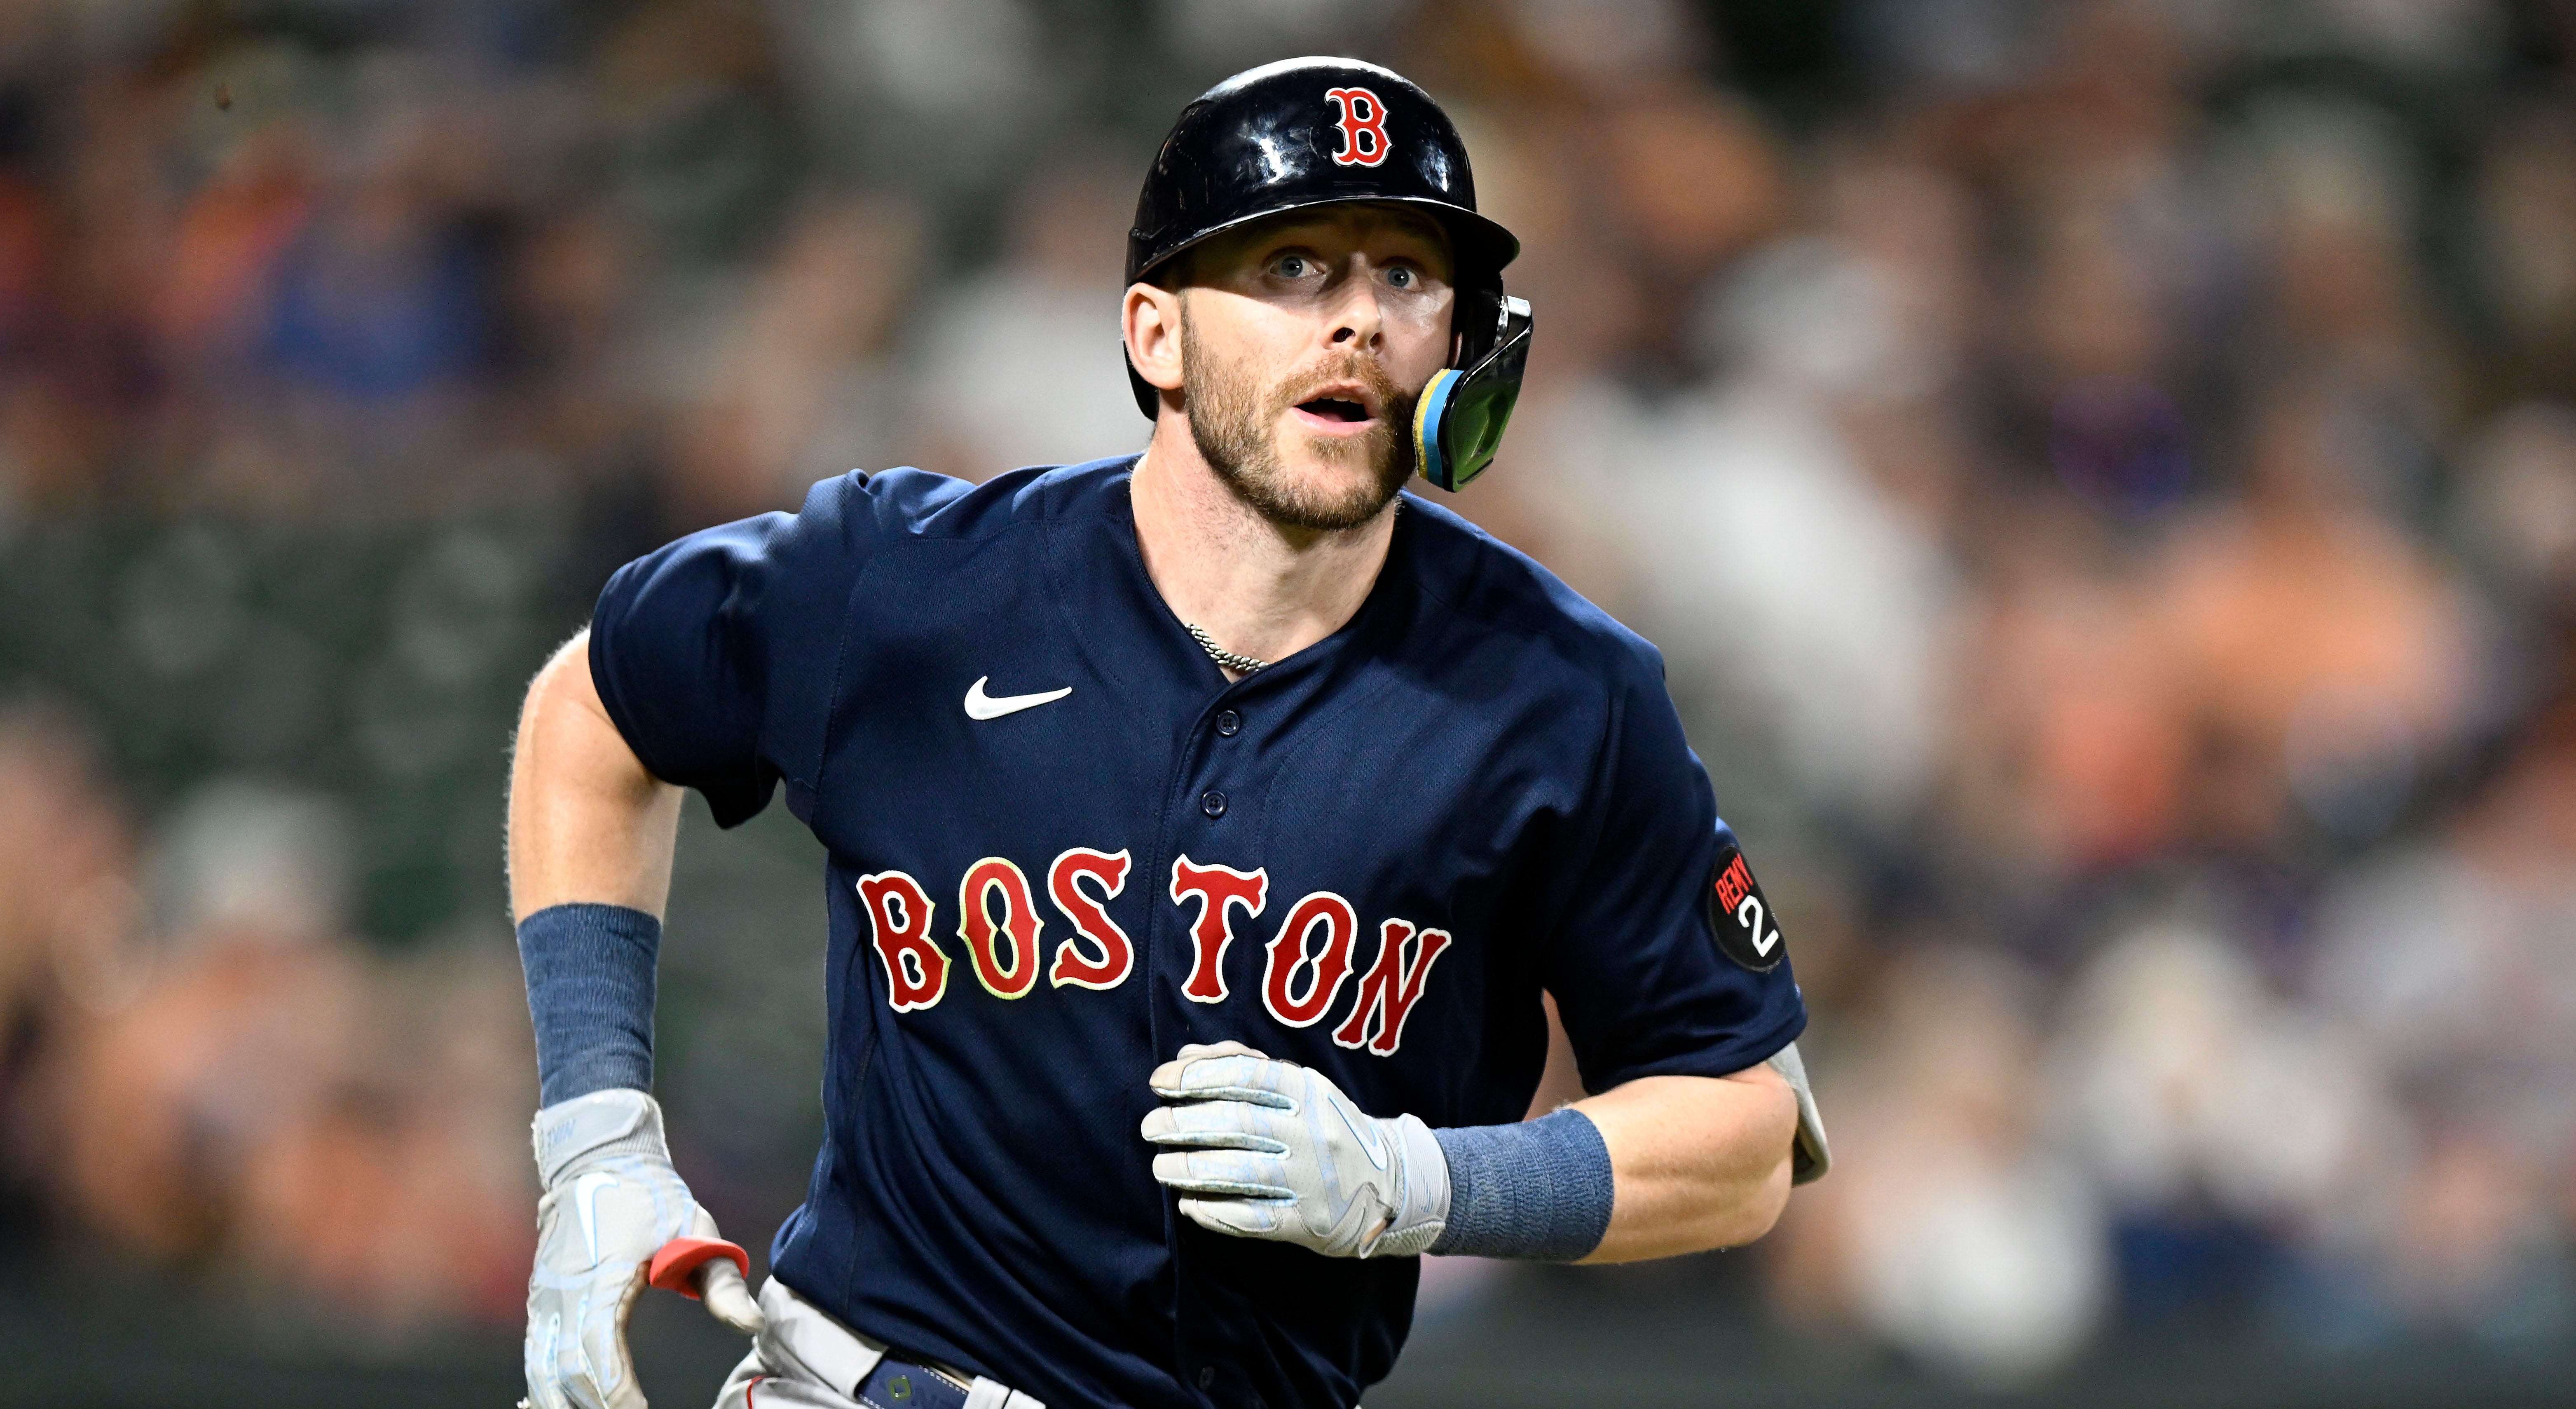 Red Sox announce Trevor Story underwent surgery to repair elbow